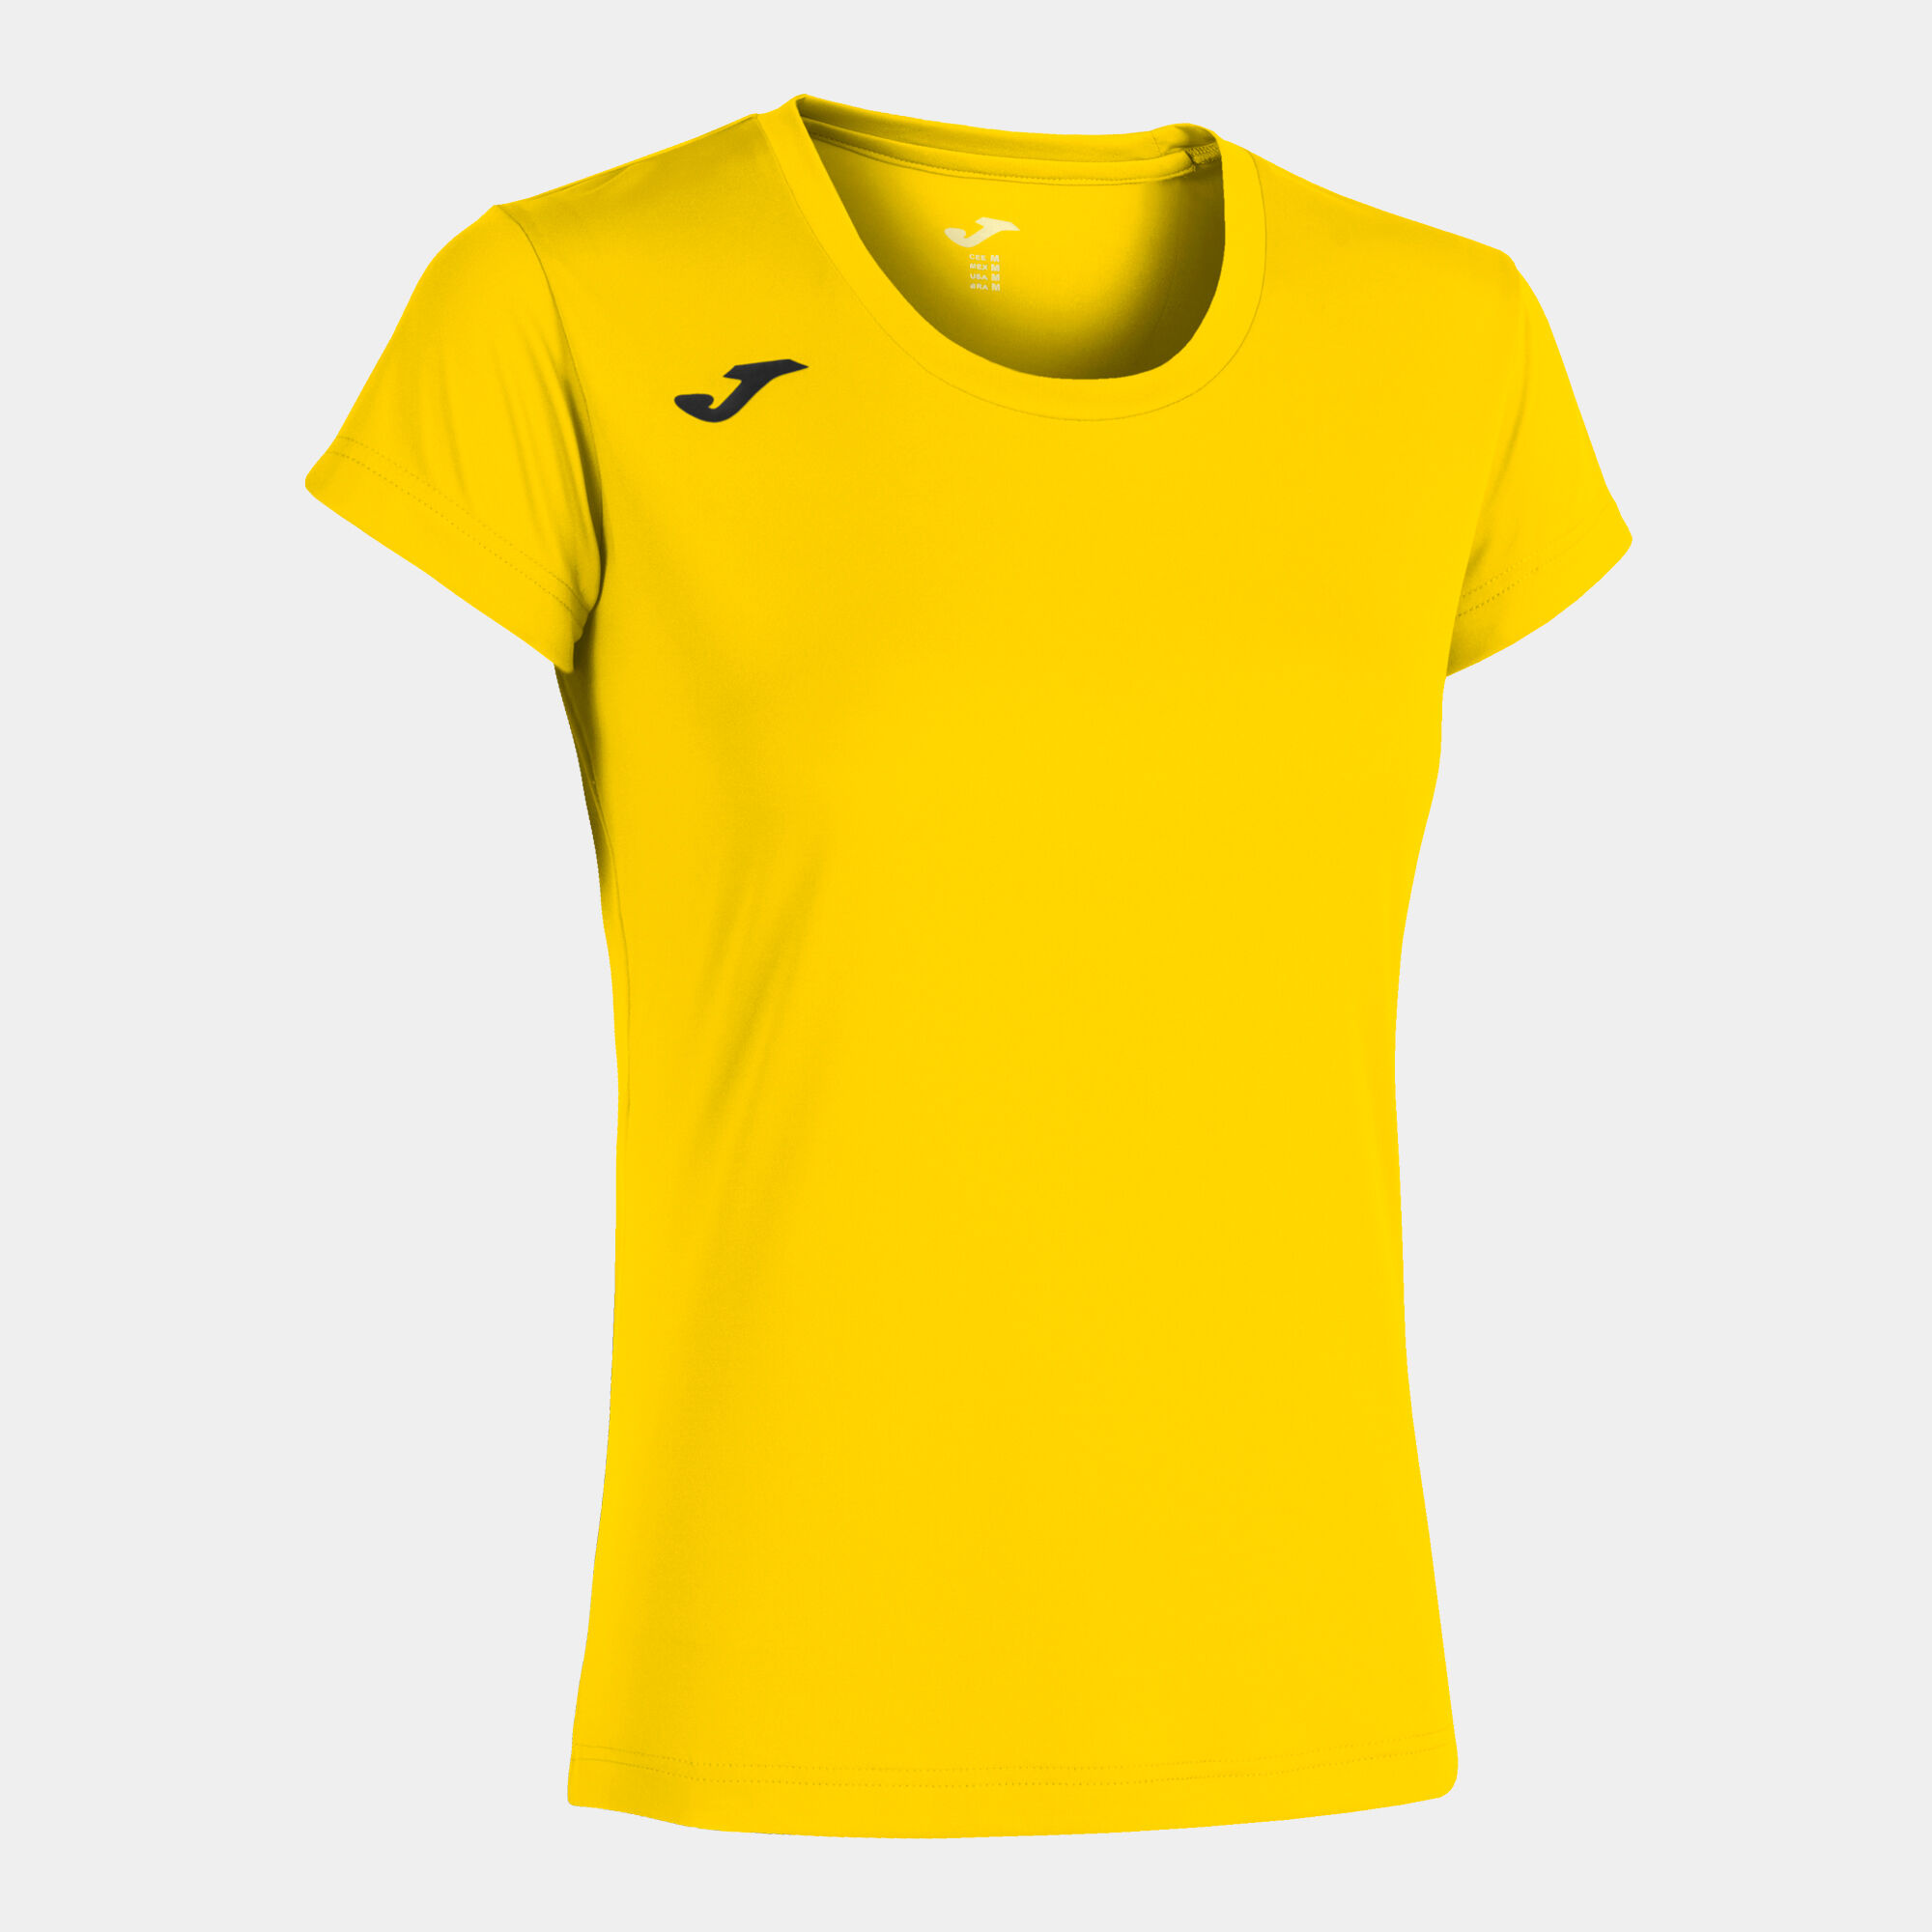 MAILLOT MANCHES COURTES FEMME RECORD II JAUNE